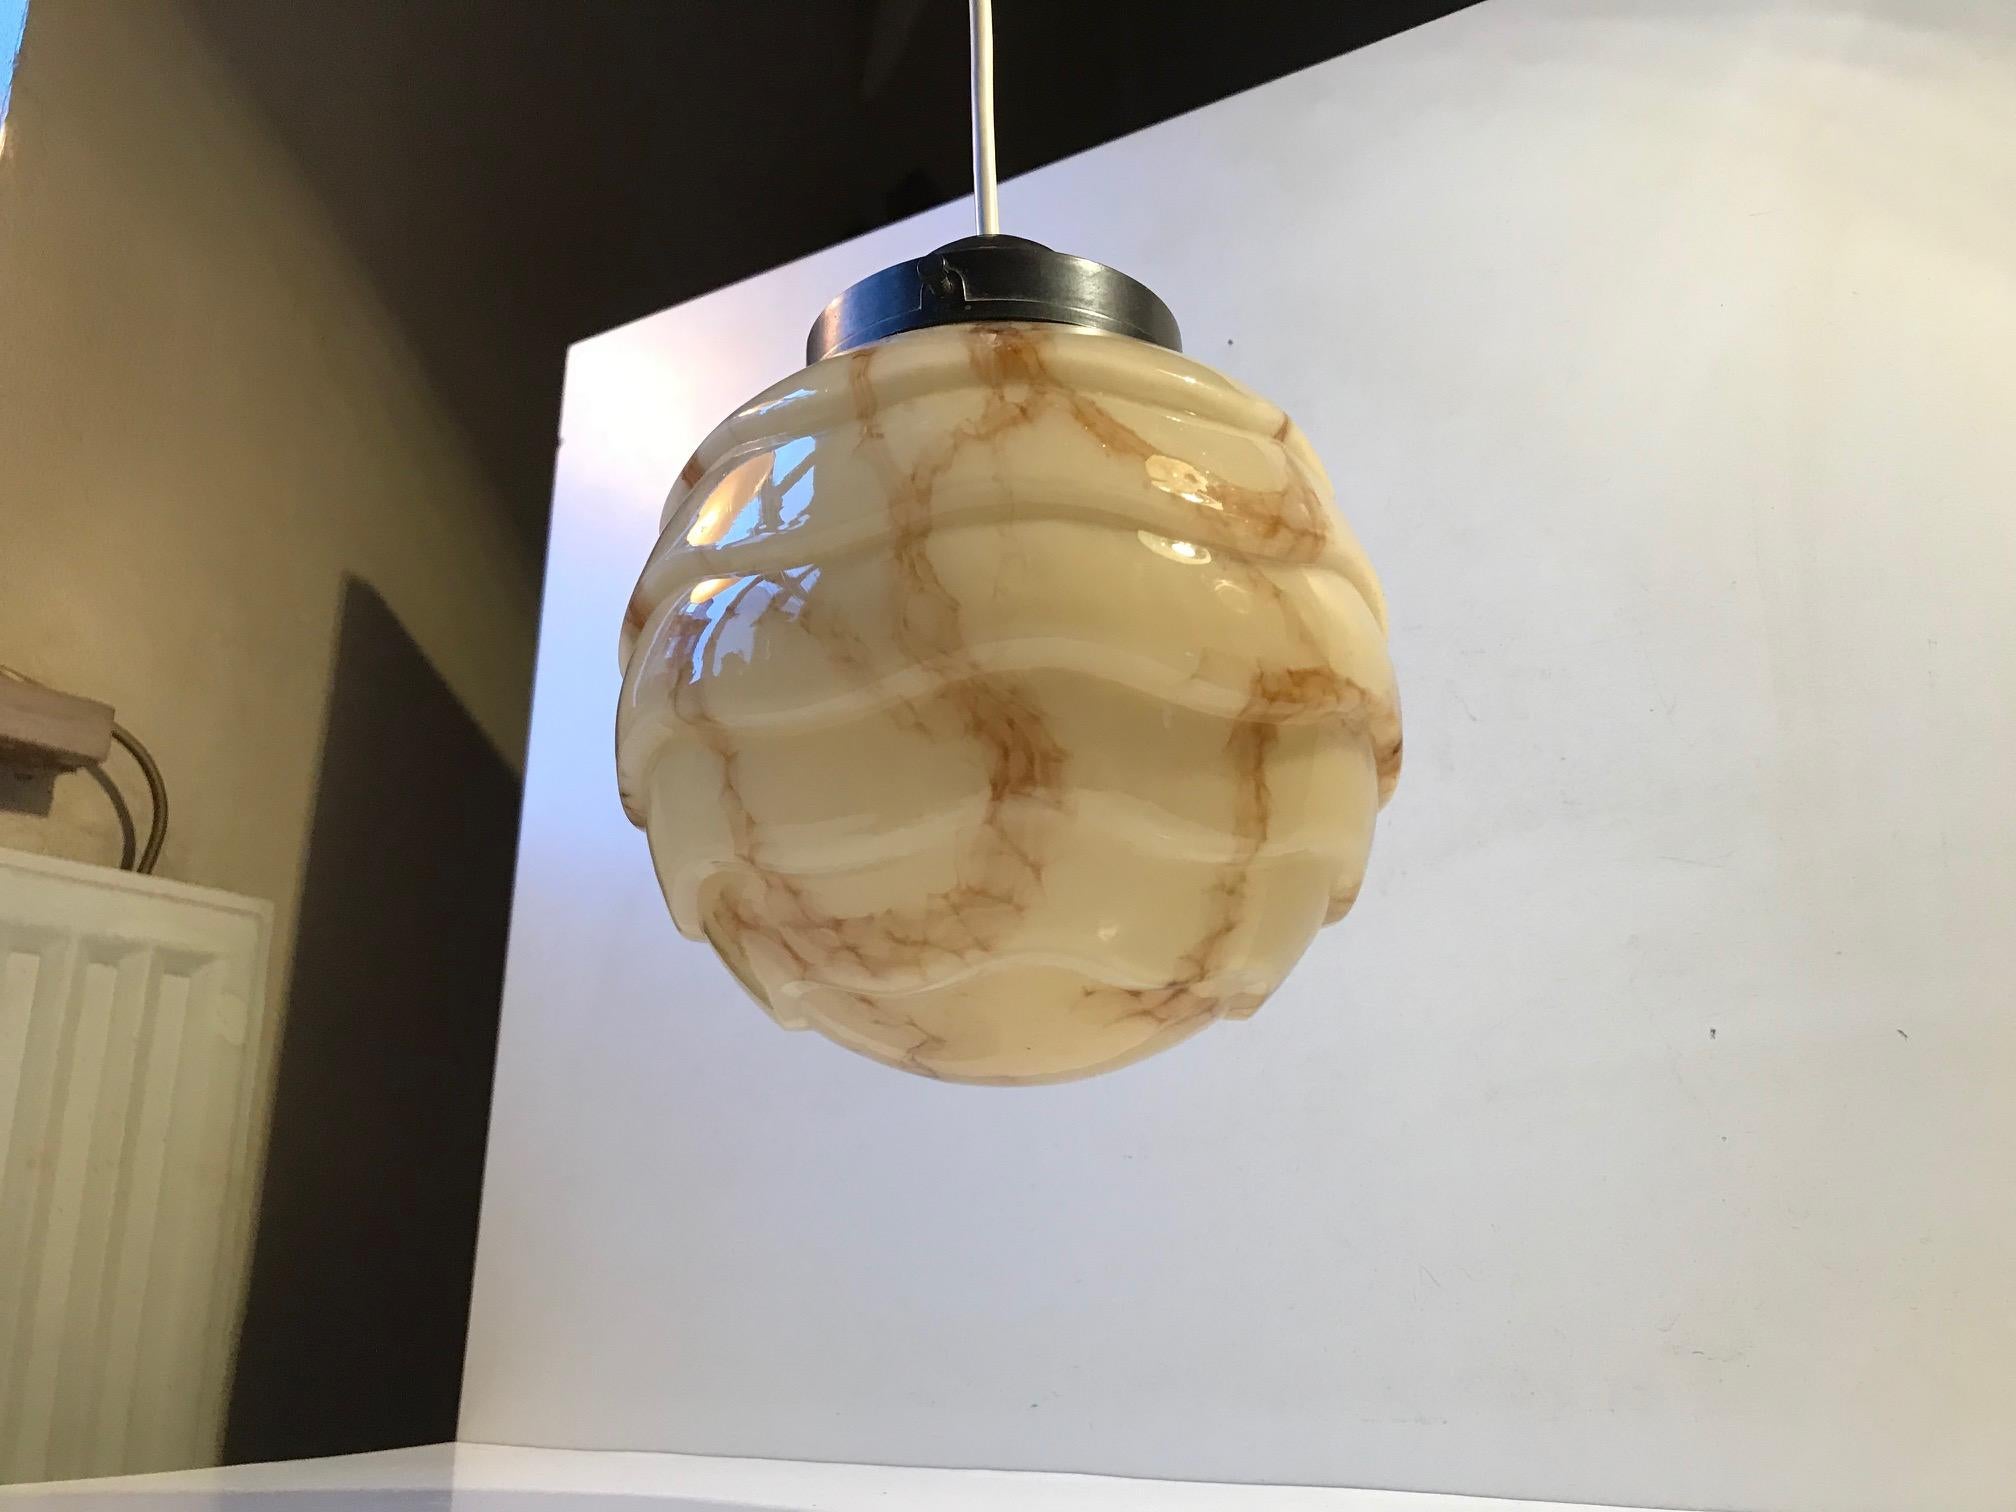 A wavy and marbled opaline glass pendant lamp with bakelite socket. Manufactured in Denmark during the 1920s or 1930s. New wire has been applied.